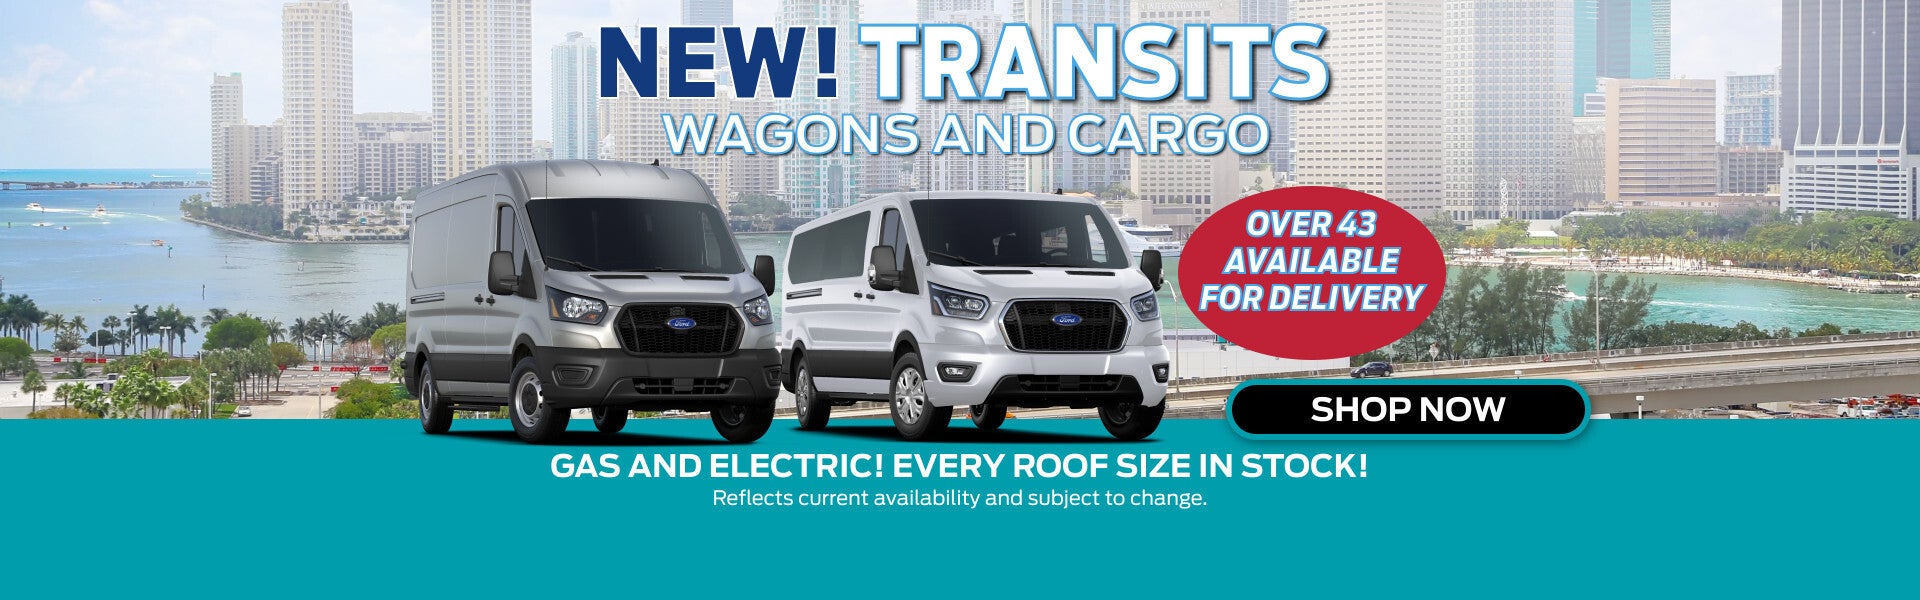 New Transits Wagon and Cargo